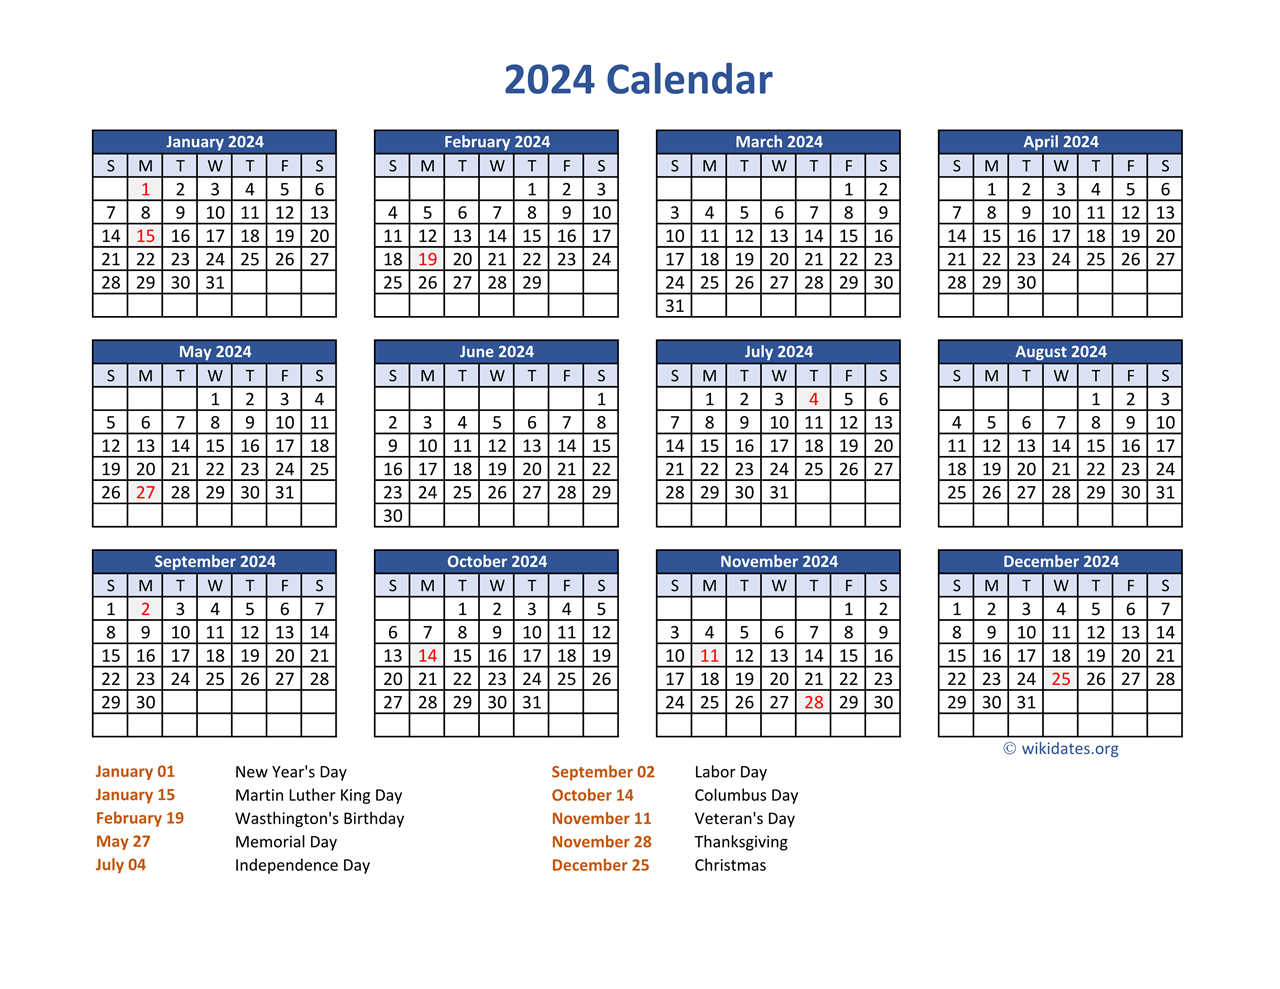 Pdf Calendar 2024 With Federal Holidays | Wikidates for Calendar 2024 With Holidays Printable Free